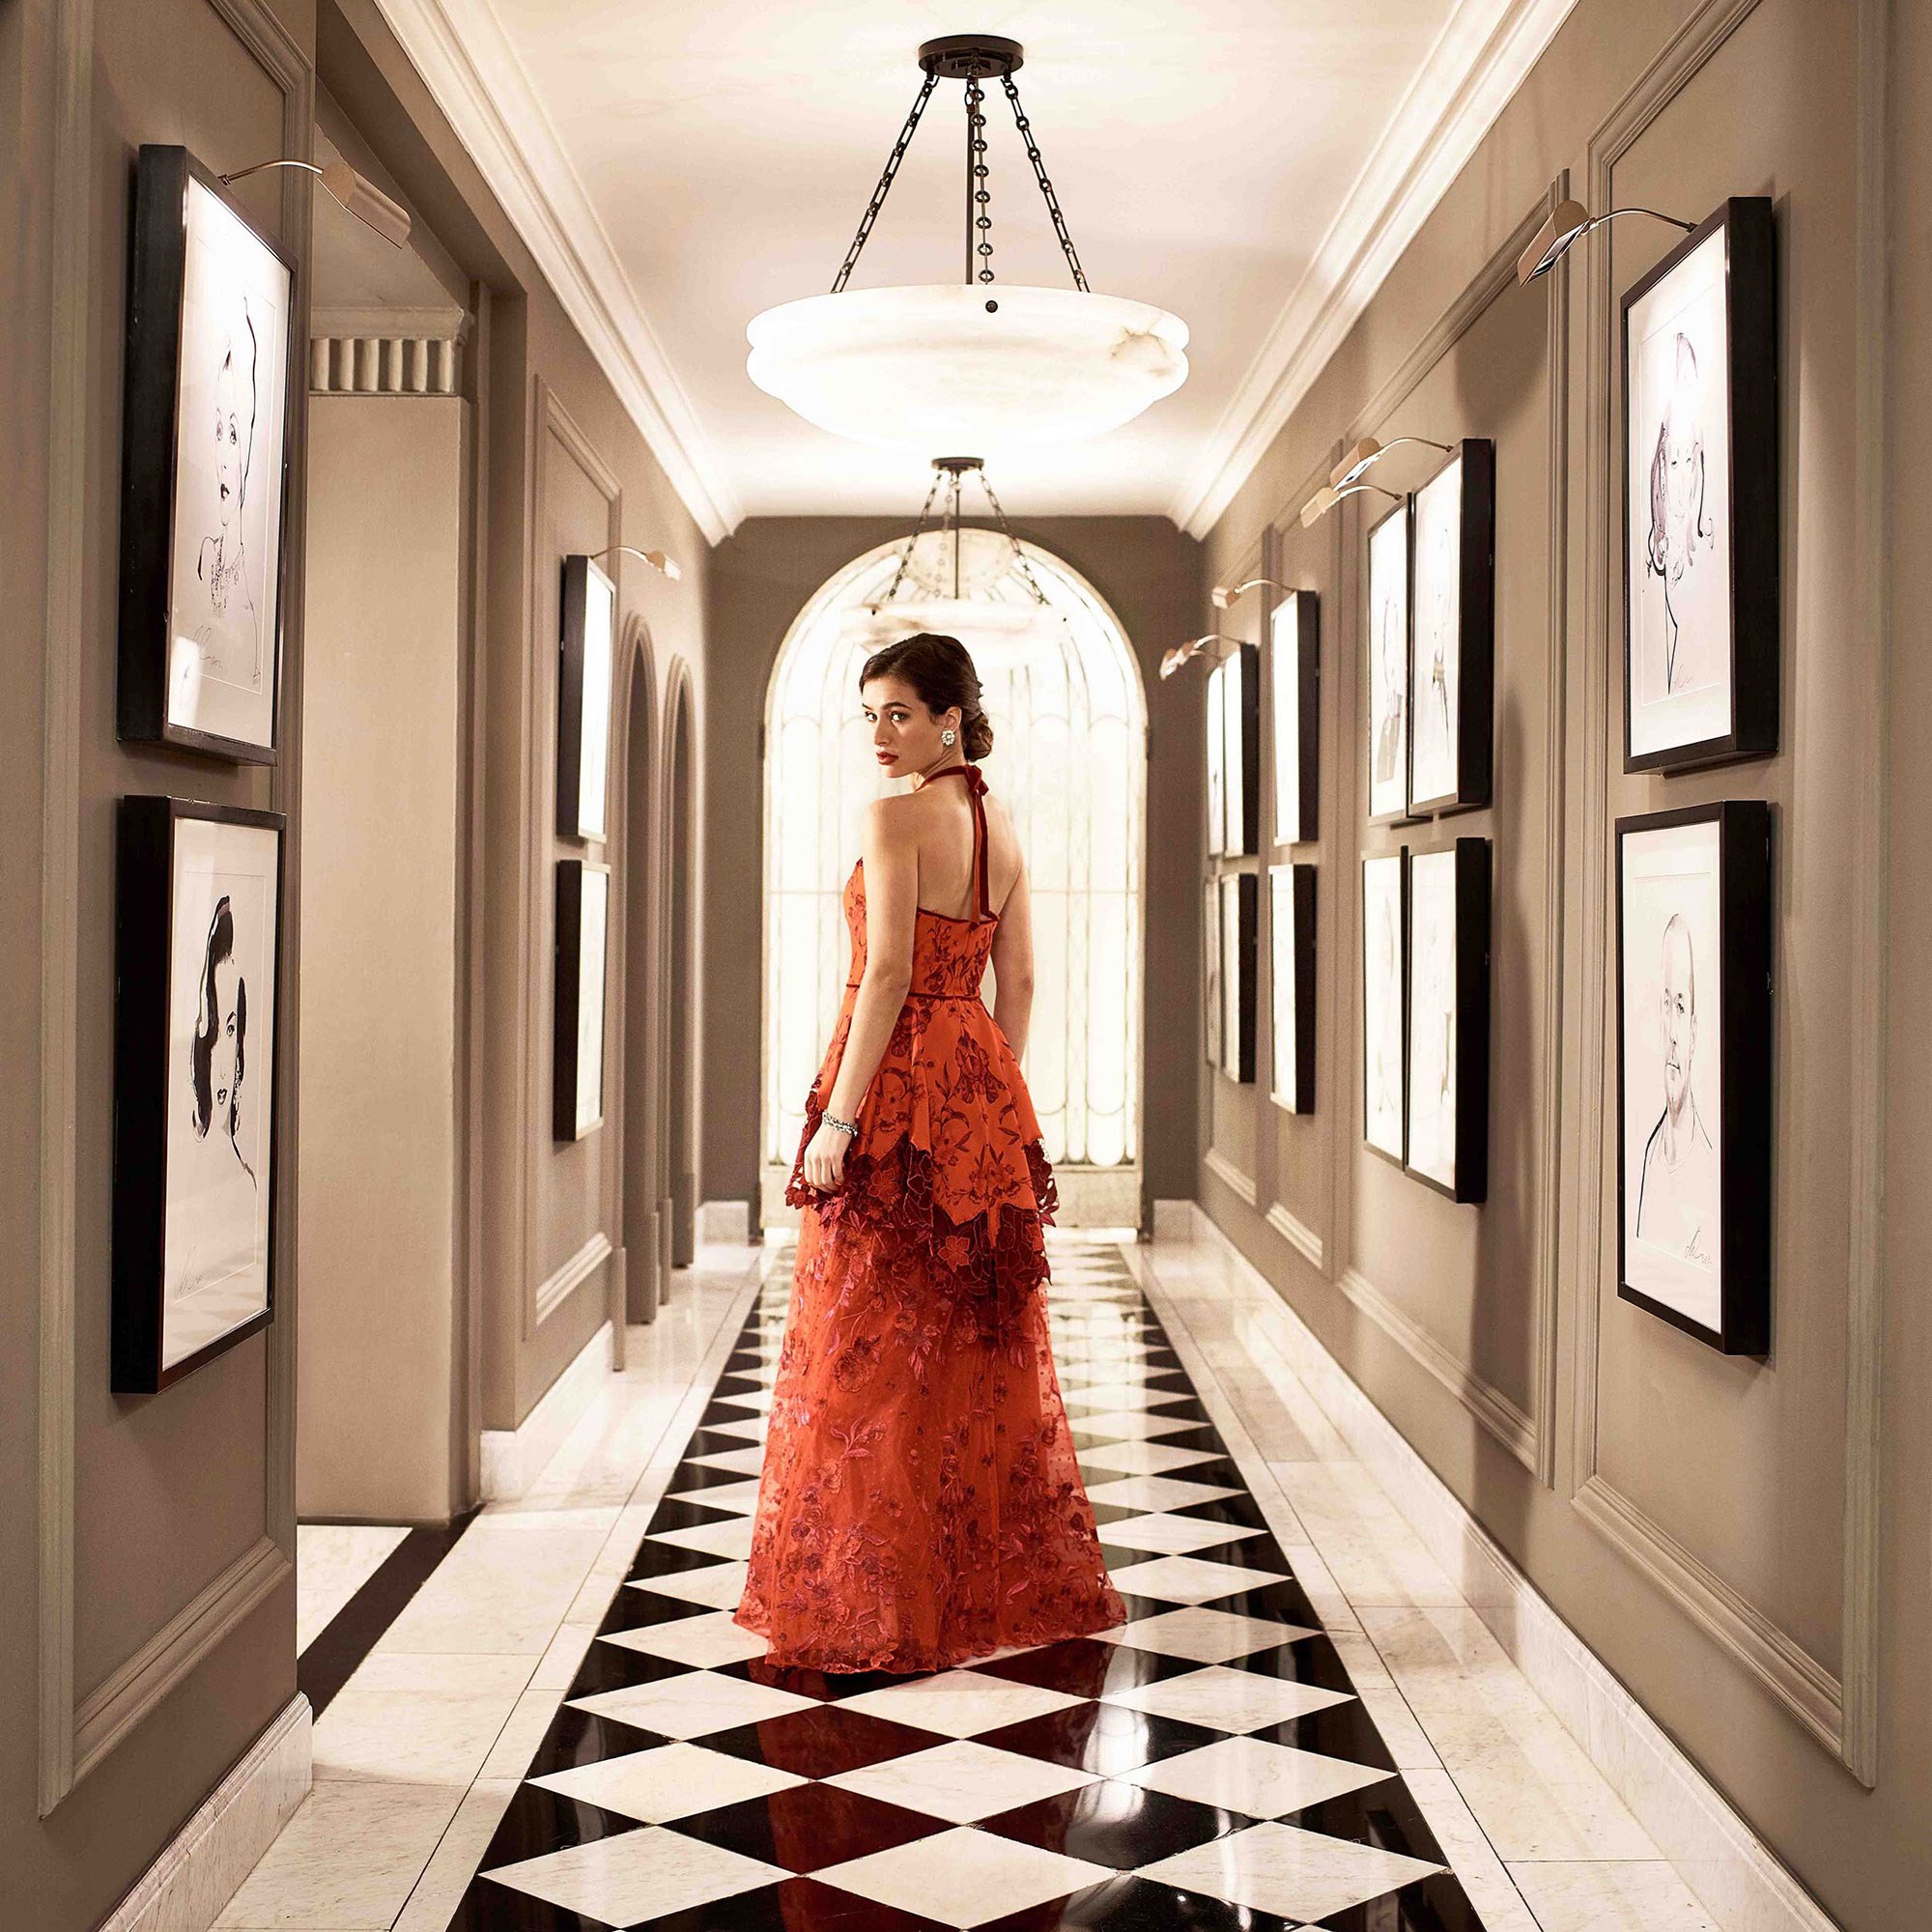 A girl in a red dress looking from the back in the corridor of Claridge's Hotel, in an art deco interior design.